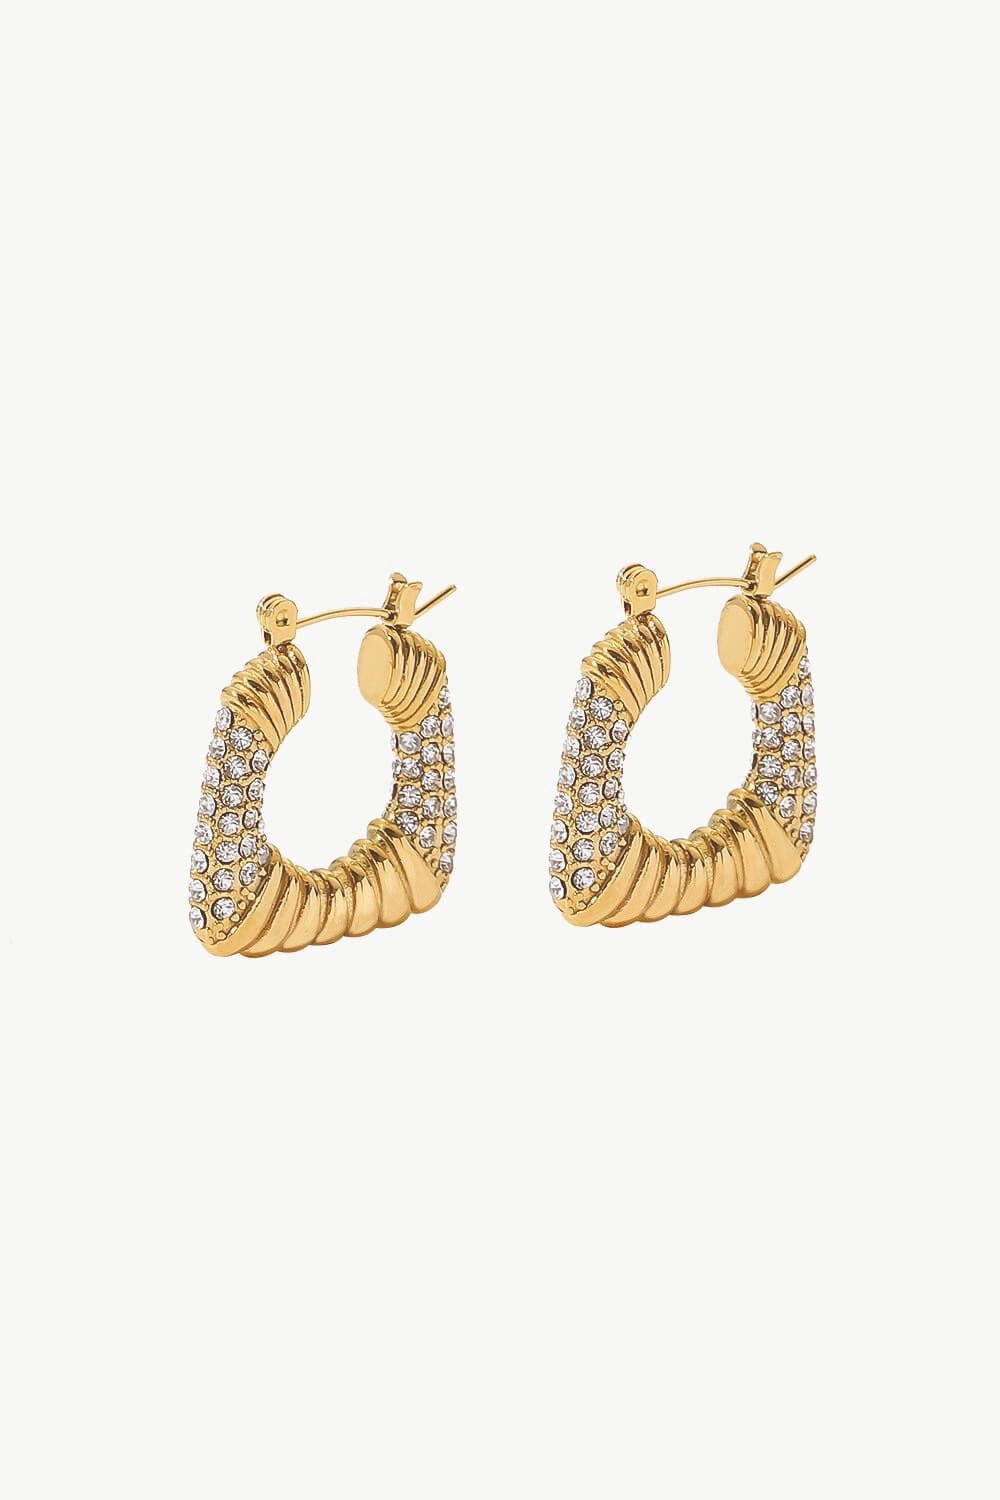 18K Gold Plated Inlaid Cubic Zirconia Earrings - Uylee's Boutique